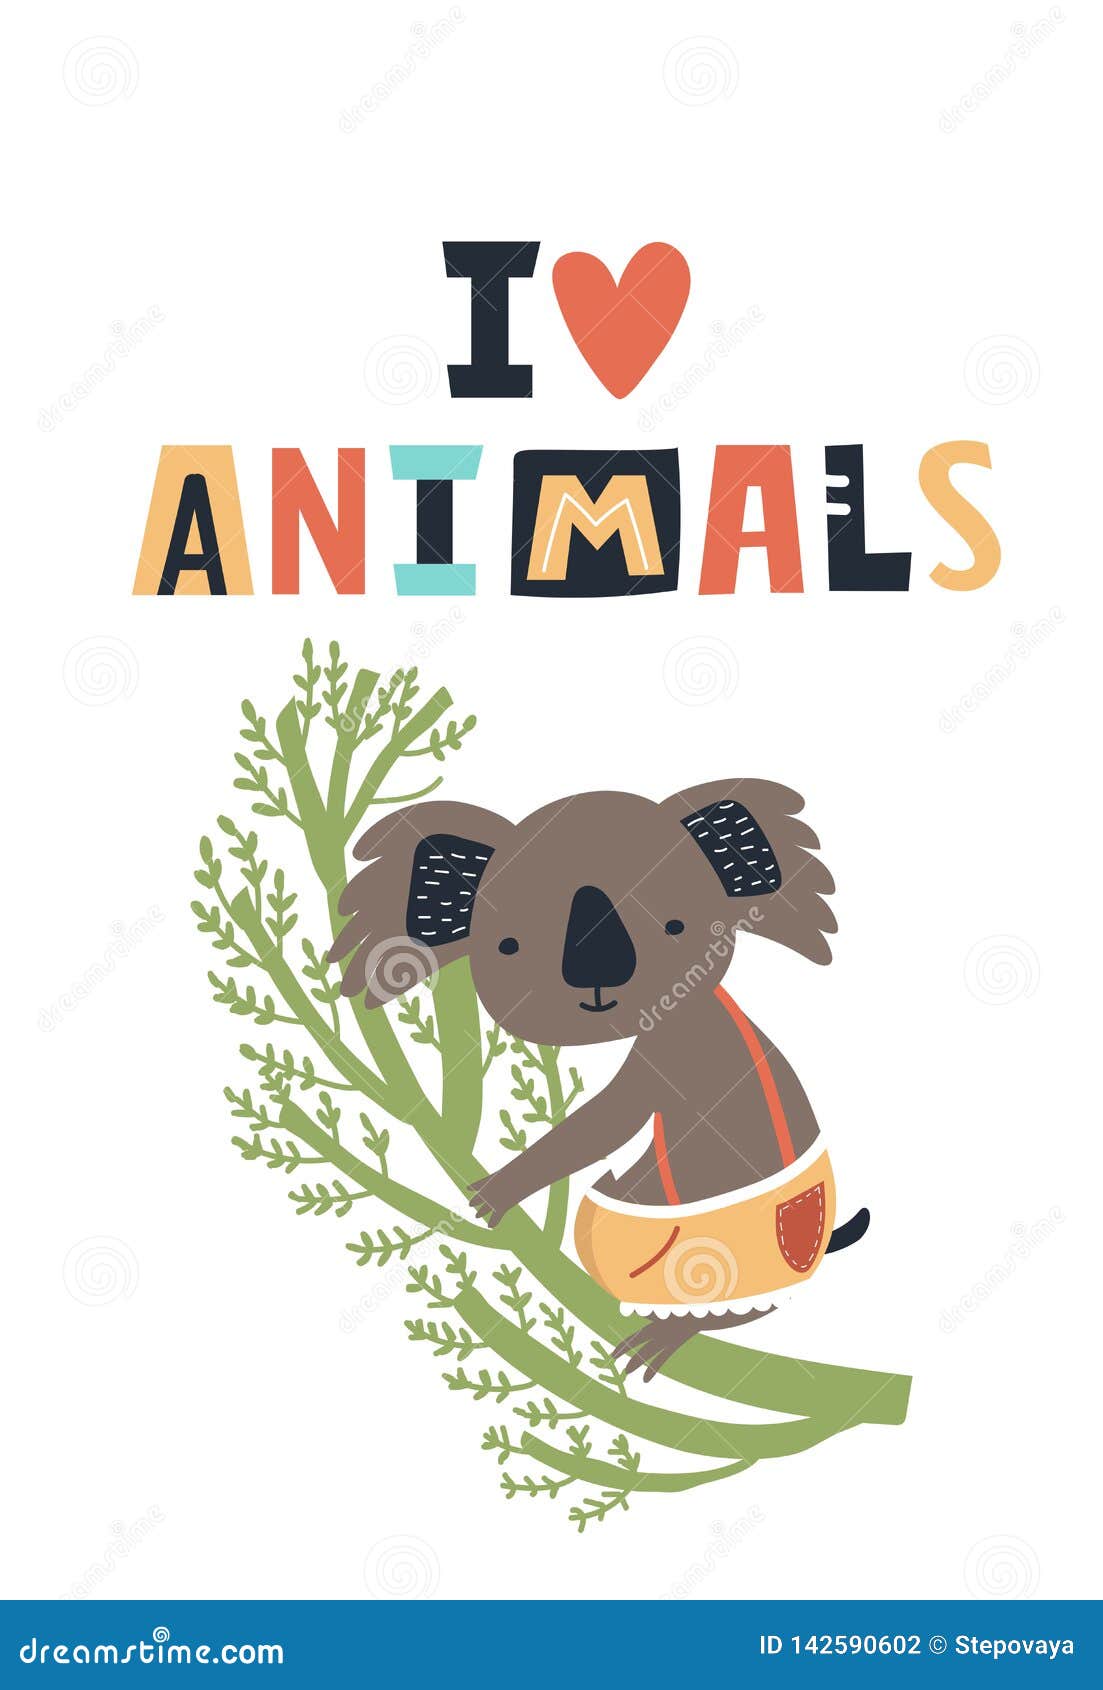 I Love Animals - Cute Kids Hand Drawn Nursery Poster with Koala Animal and  Lettering. Color Vector Illustration. Stock Vector - Illustration of  cartoon, card: 142590602